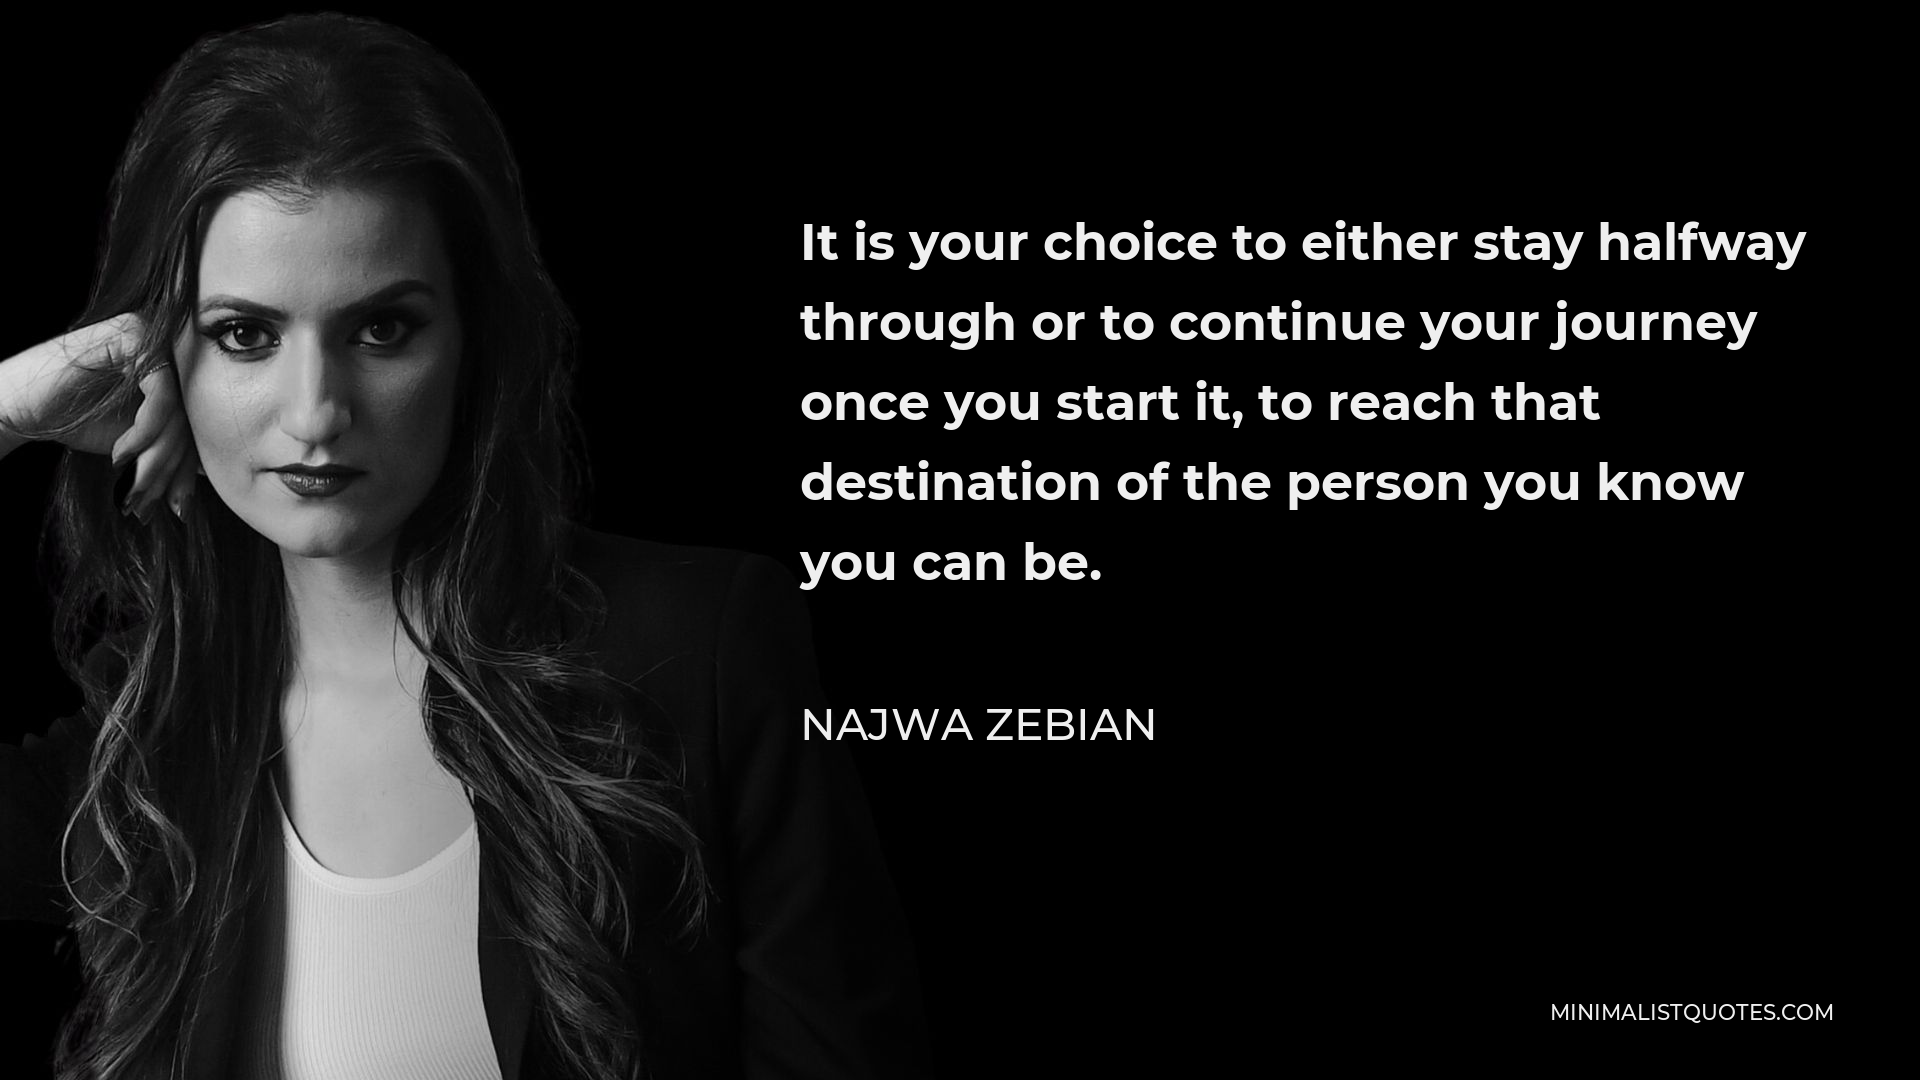 Najwa Zebian Quote - It is your choice to either stay halfway through or to continue your journey once you start it, to reach that destination of the person you know you can be.